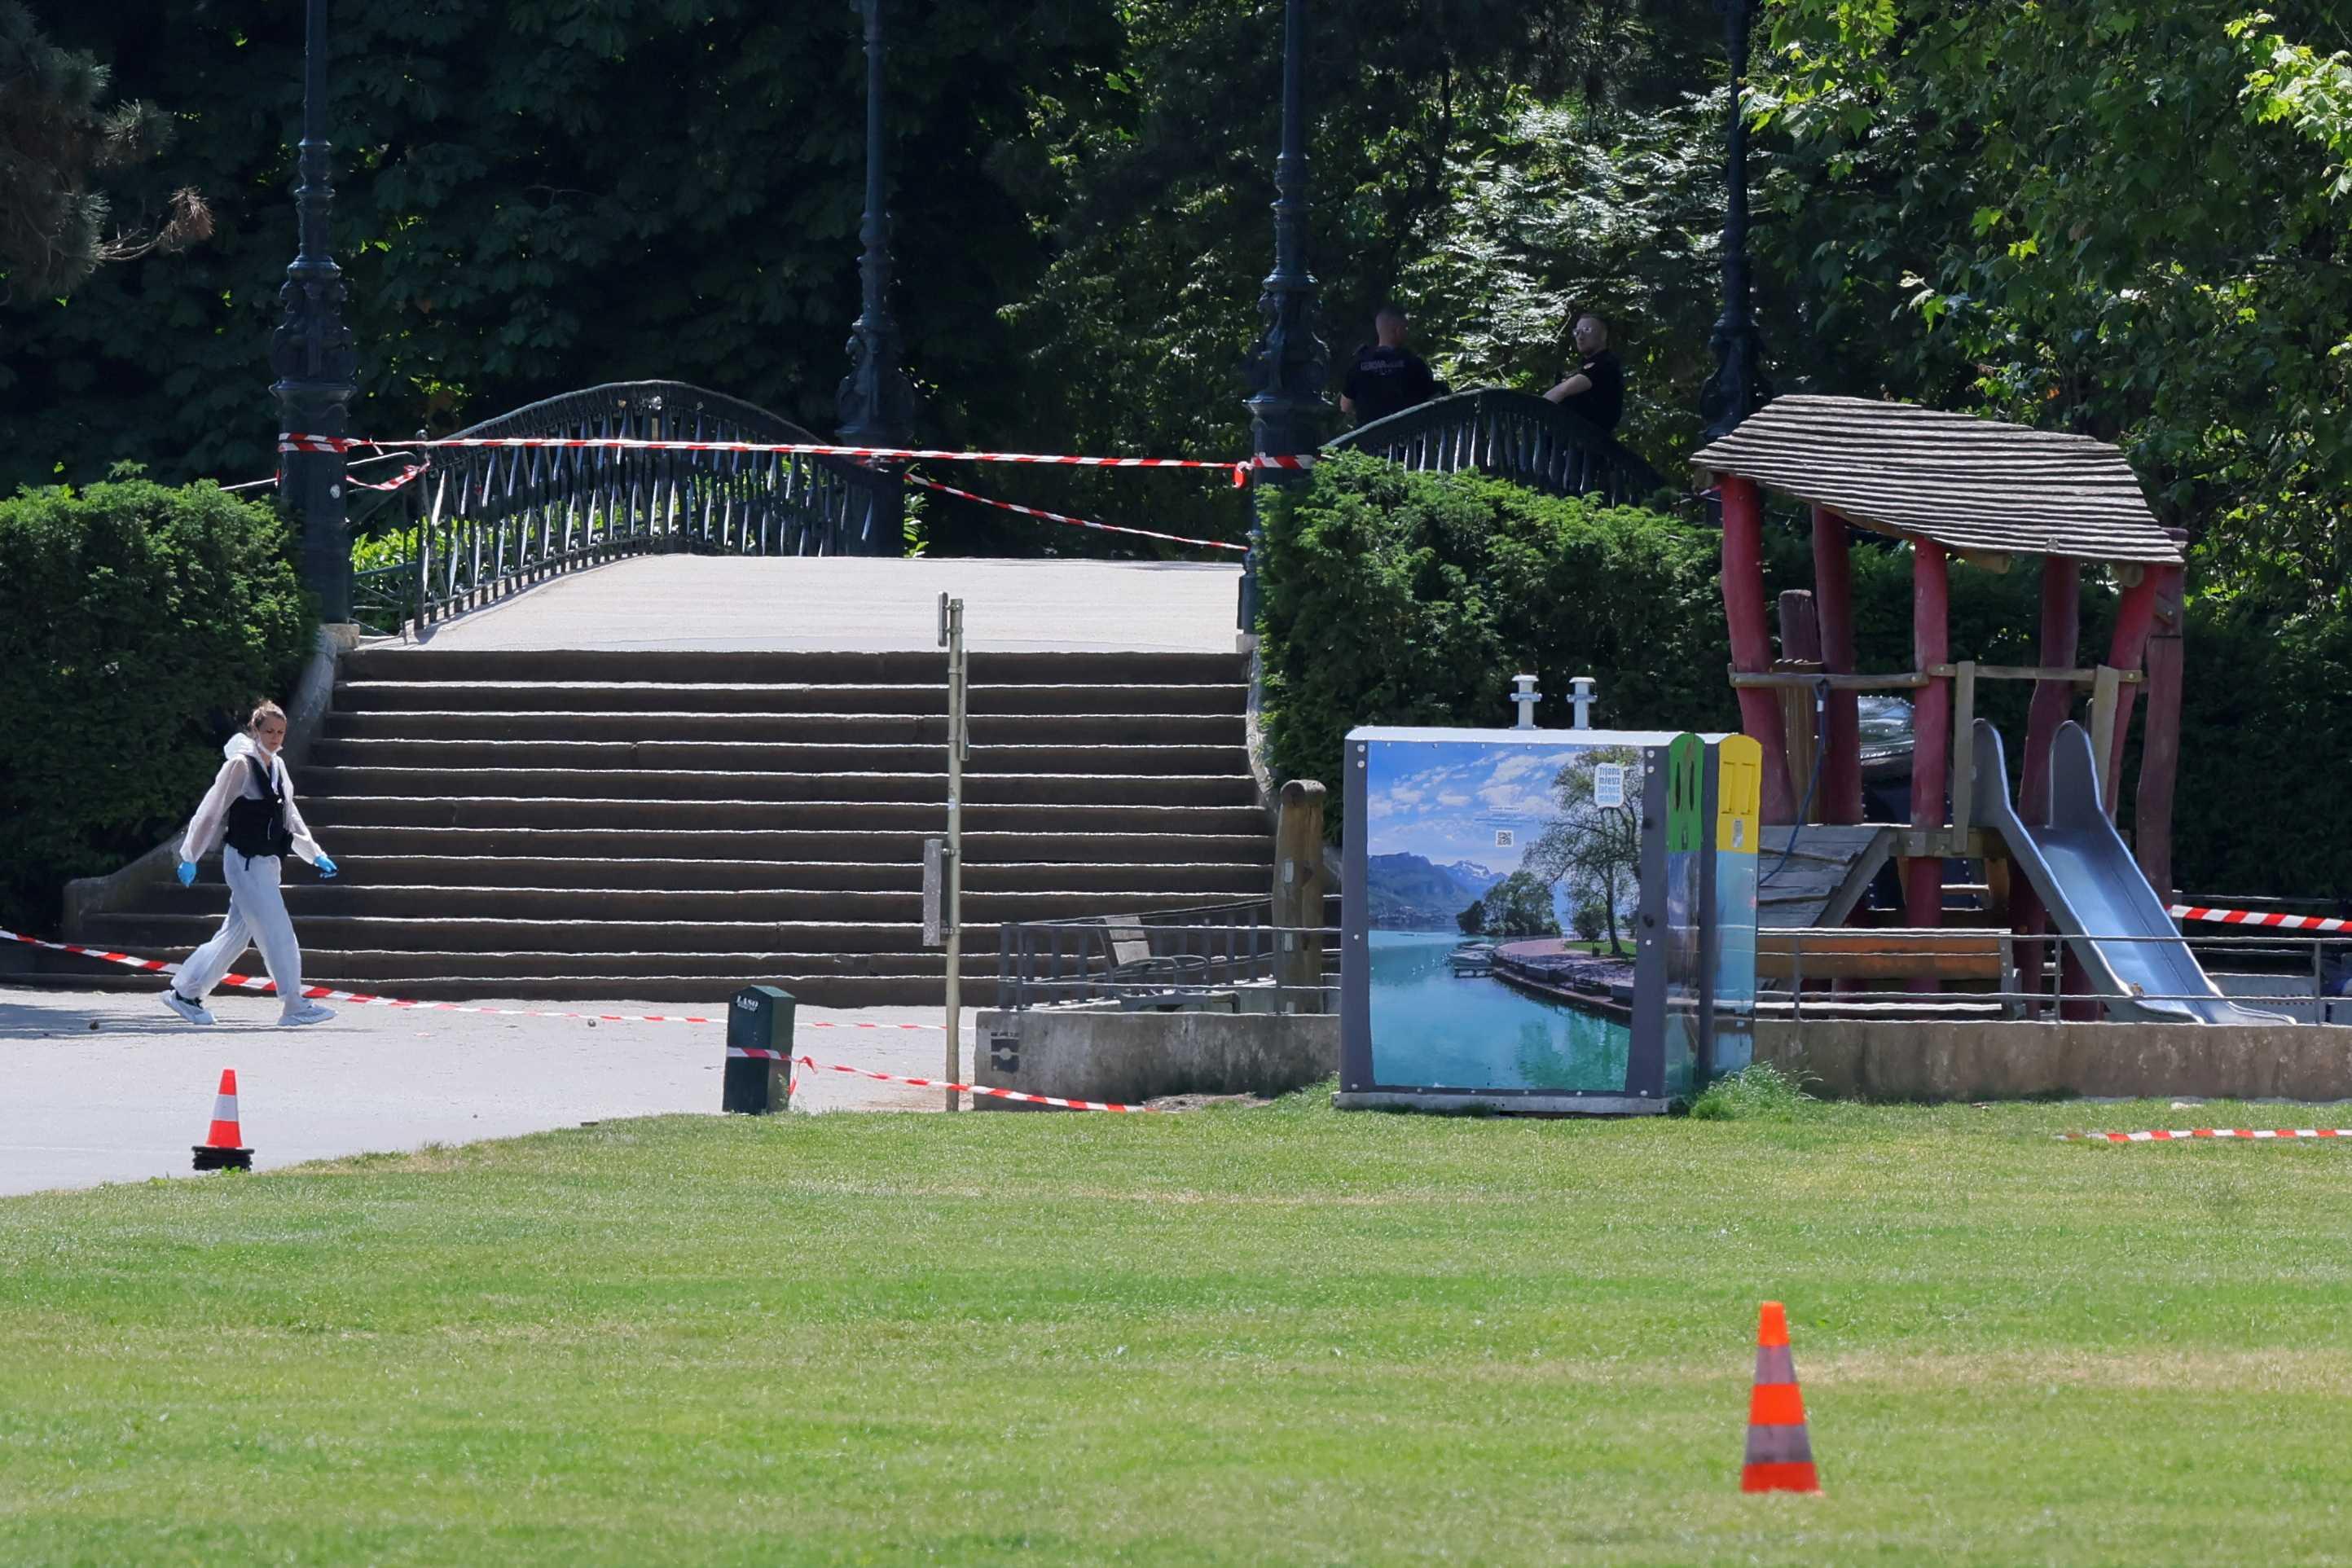 French scientific police work on the area after several children and adults have been injured in a knife attack at the Le Paquier park near the lake in Annecy, in the French Alps, France, June 8. Photo: Reuters